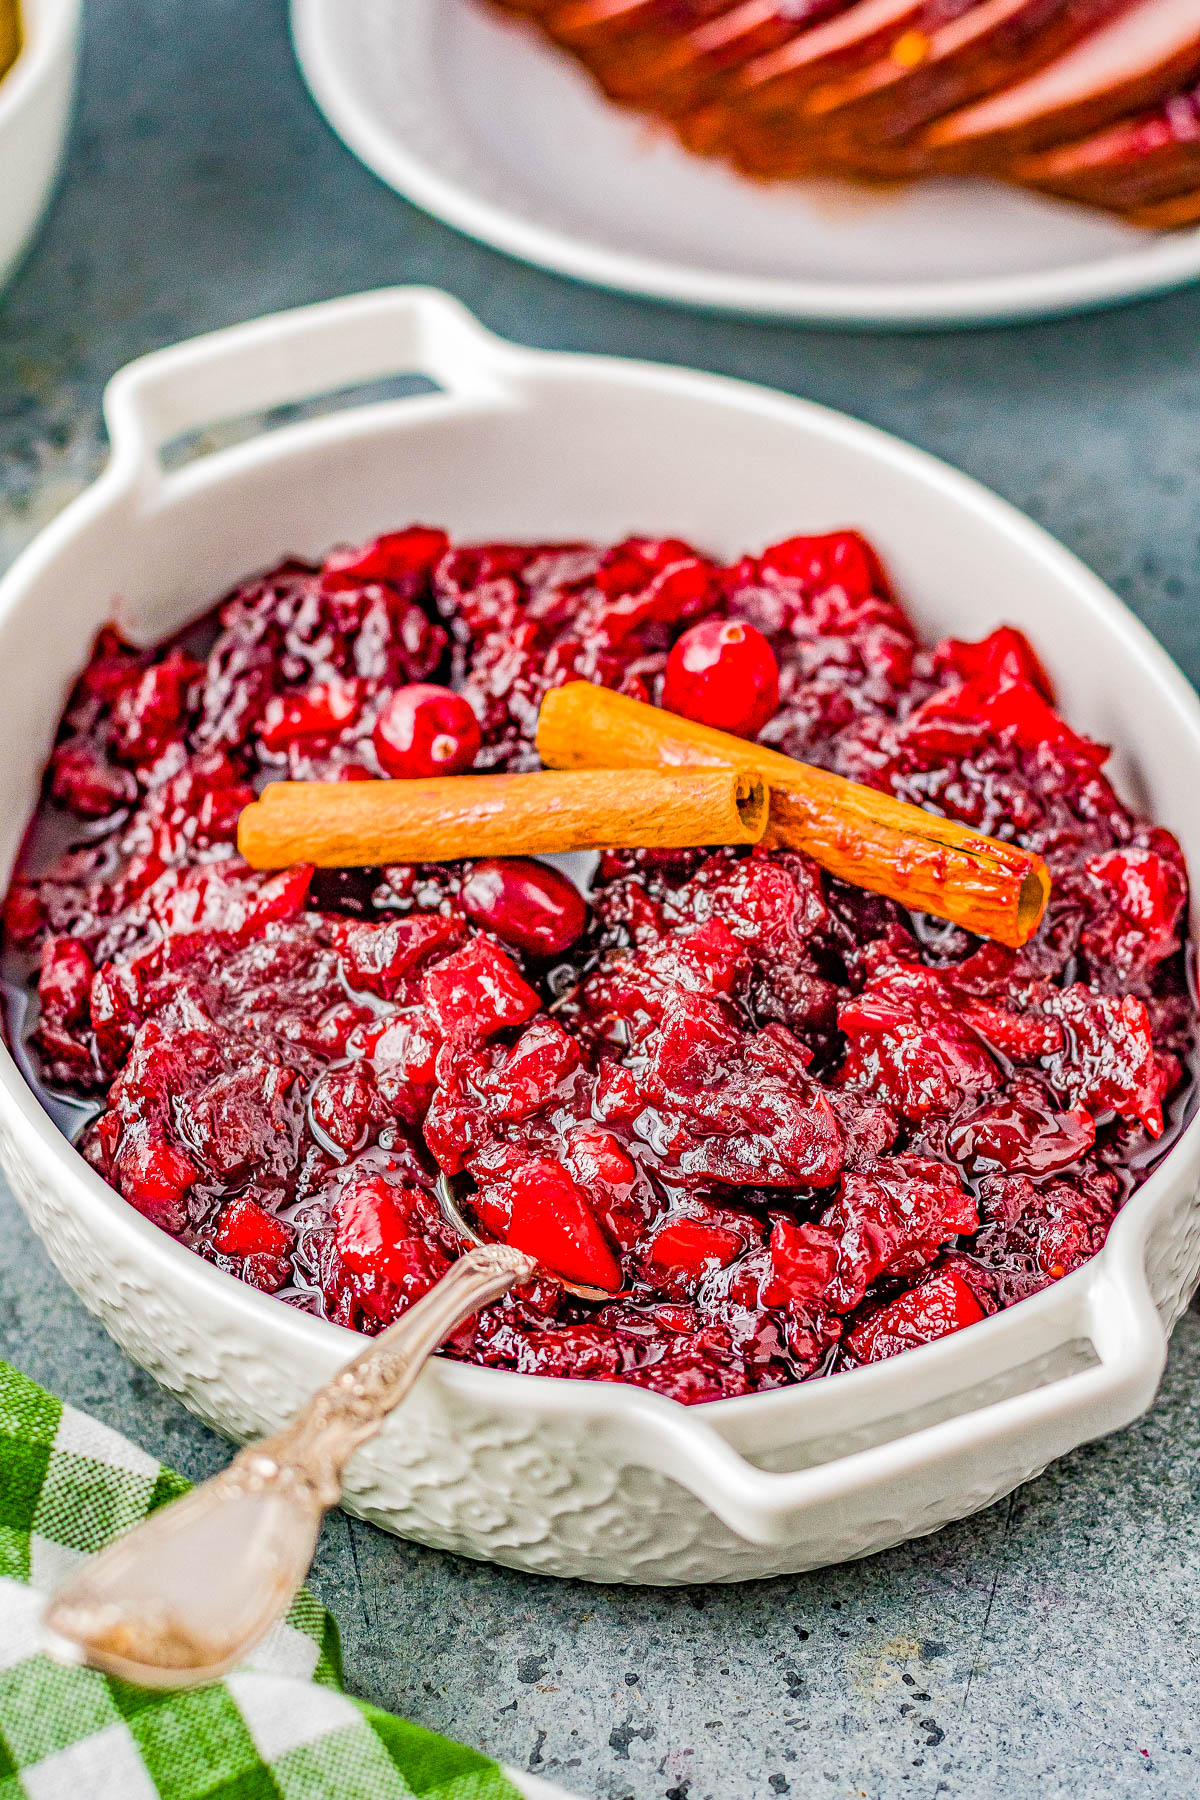 Cinnamon Apple Cranberry Sauce - Spice up your holiday celebrations with this scrumptious FAST and EASY homemade cranberry sauce that's made with cranberries, apples, apple cider, cinnamon sticks, and allspice for the PERFECT must-make side dish! A lovely balance of sweet-yet-tart with warmly spiced flavors so you'll never want to think about using store bought sauce again! 